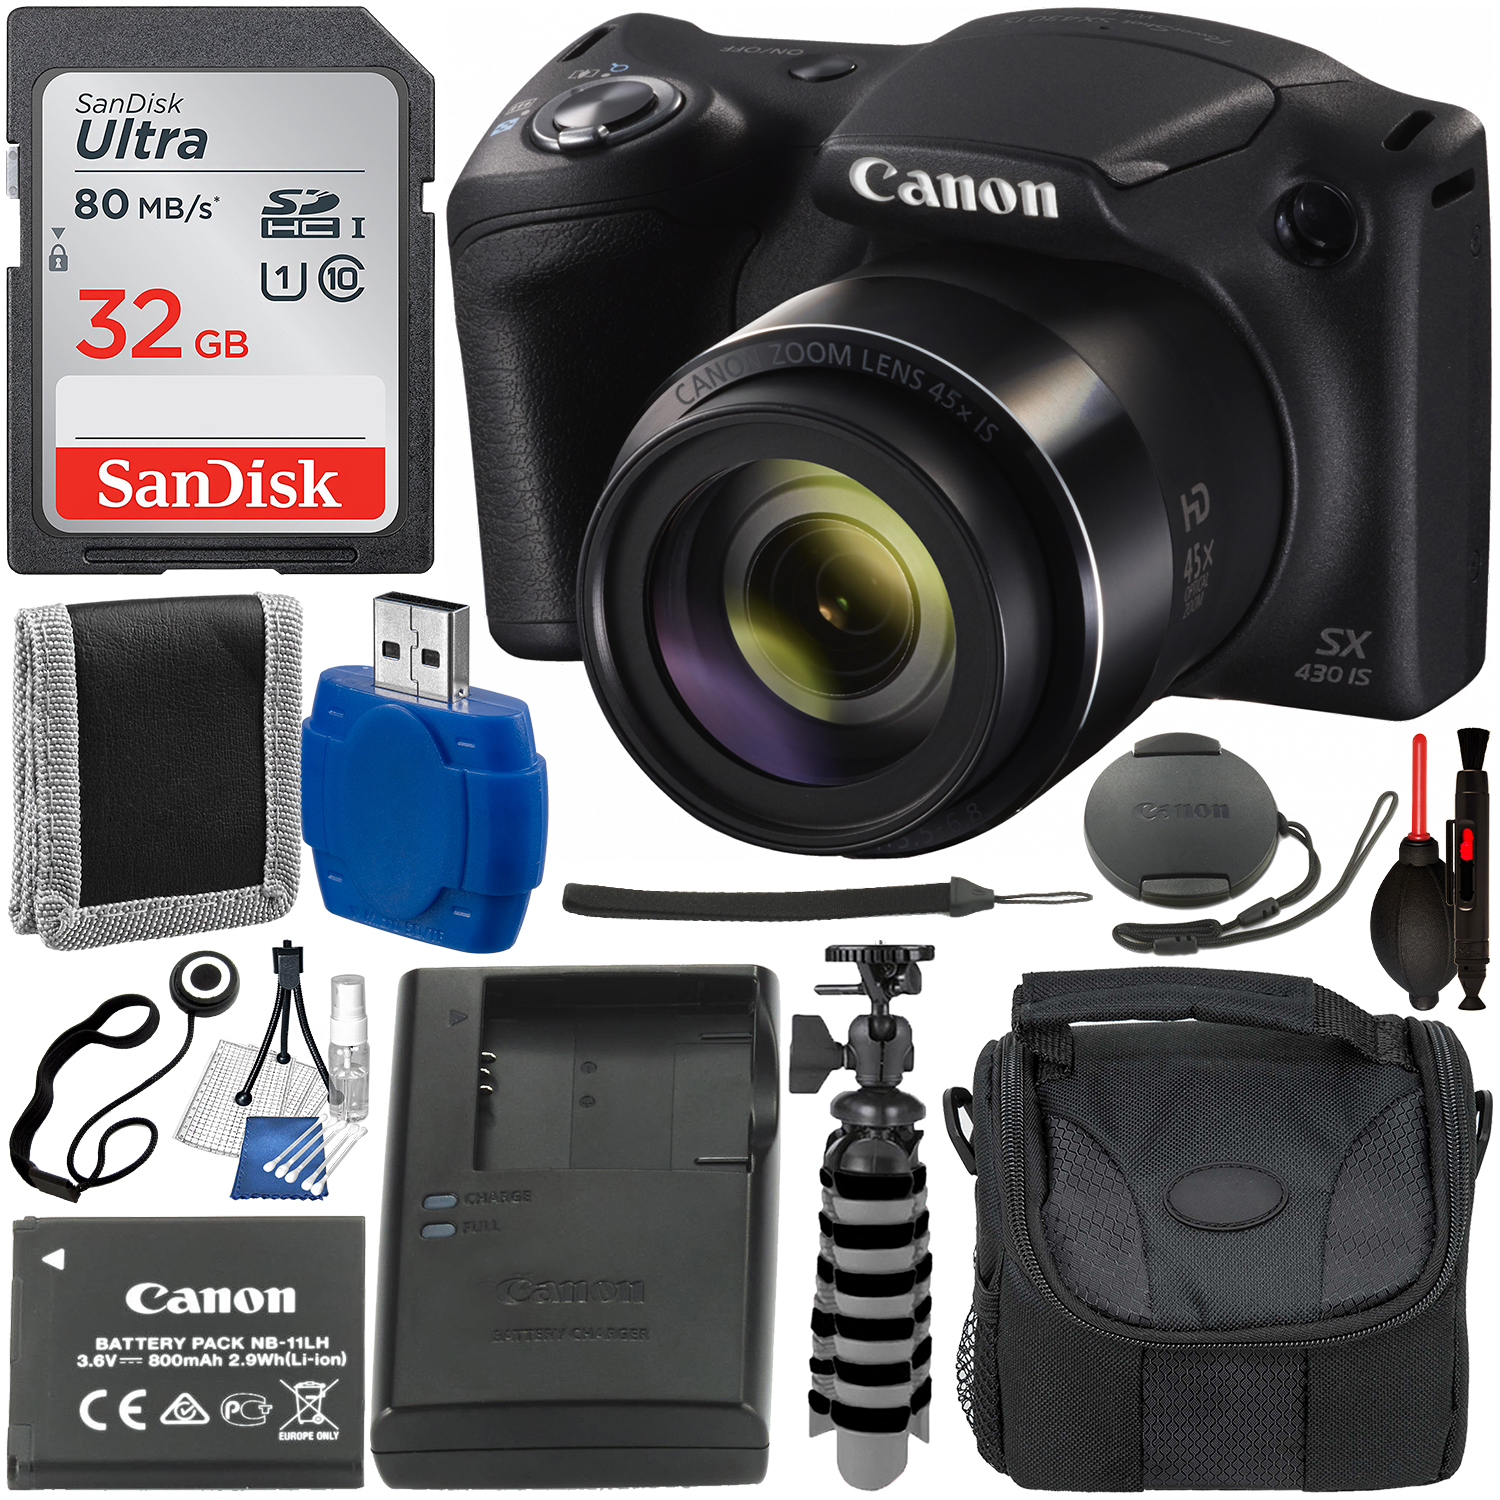 Canon PowerShot SX430 IS Digital Camera With Essential Accessory